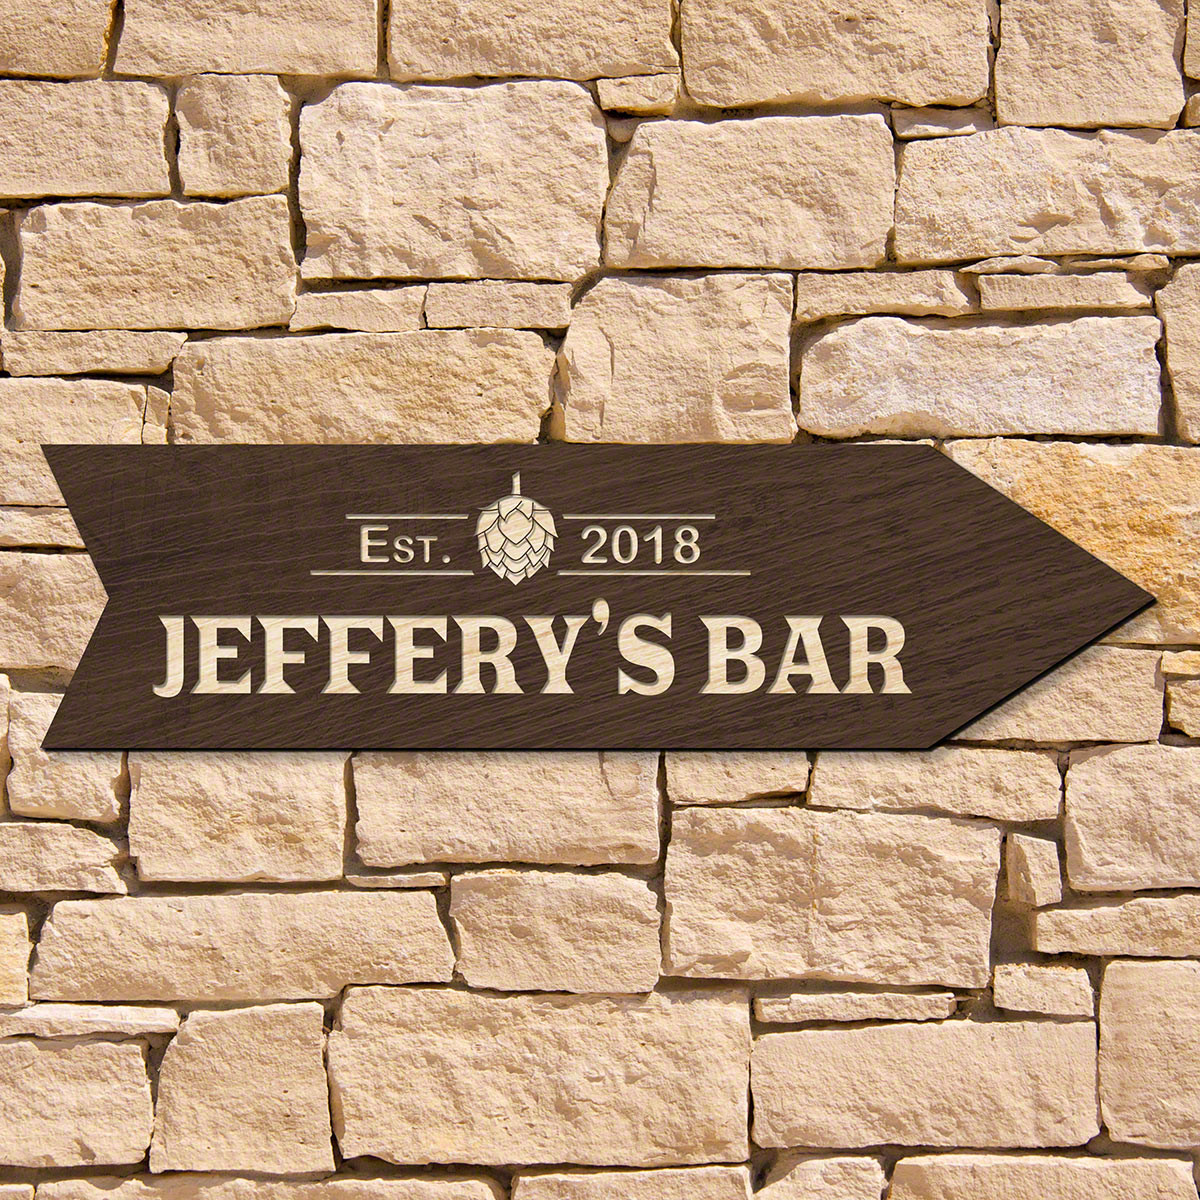 As the popularity of home brewing and home tap systems continues to rise, our Hops This Way personalized bar sign is a great way to welcome your many guests. Made in the USA from beautiful half-inch thick natural birch, each of these wooden signs is hand #bar